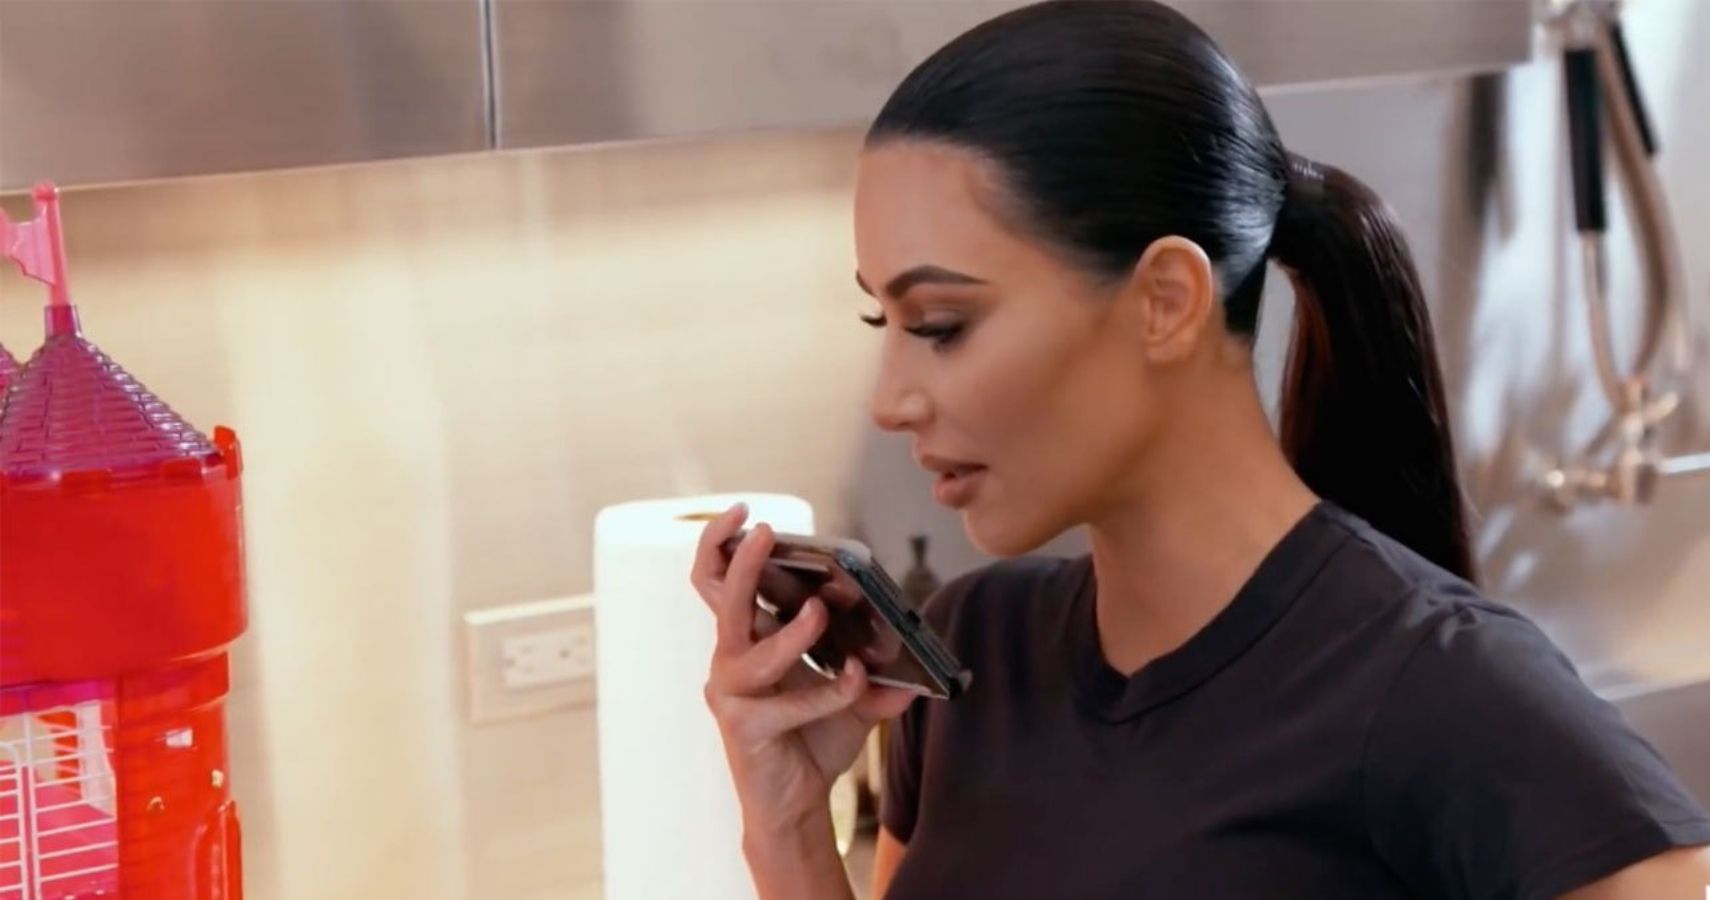 North West's Hamster Dies And Kim Kardashian Goes Off On Khloé